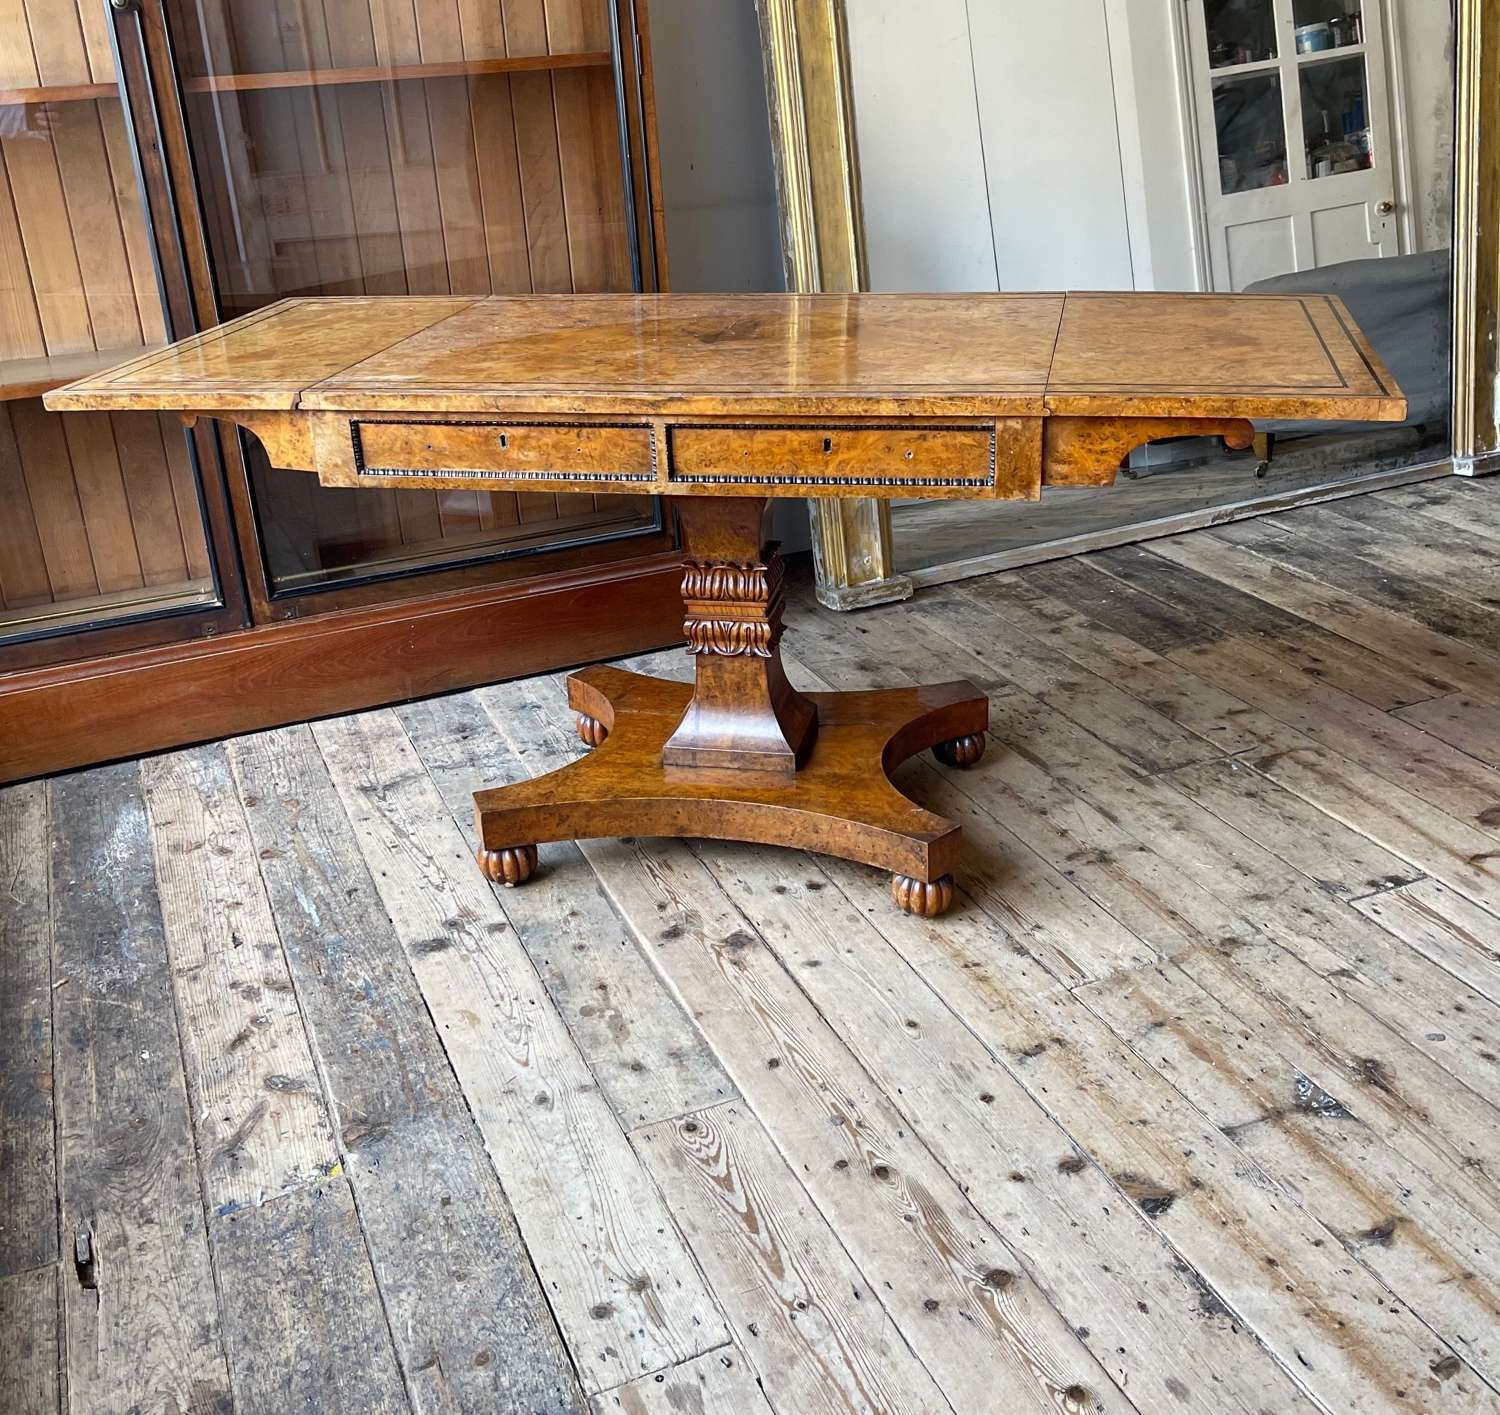 19th century centre table by William Trotter.